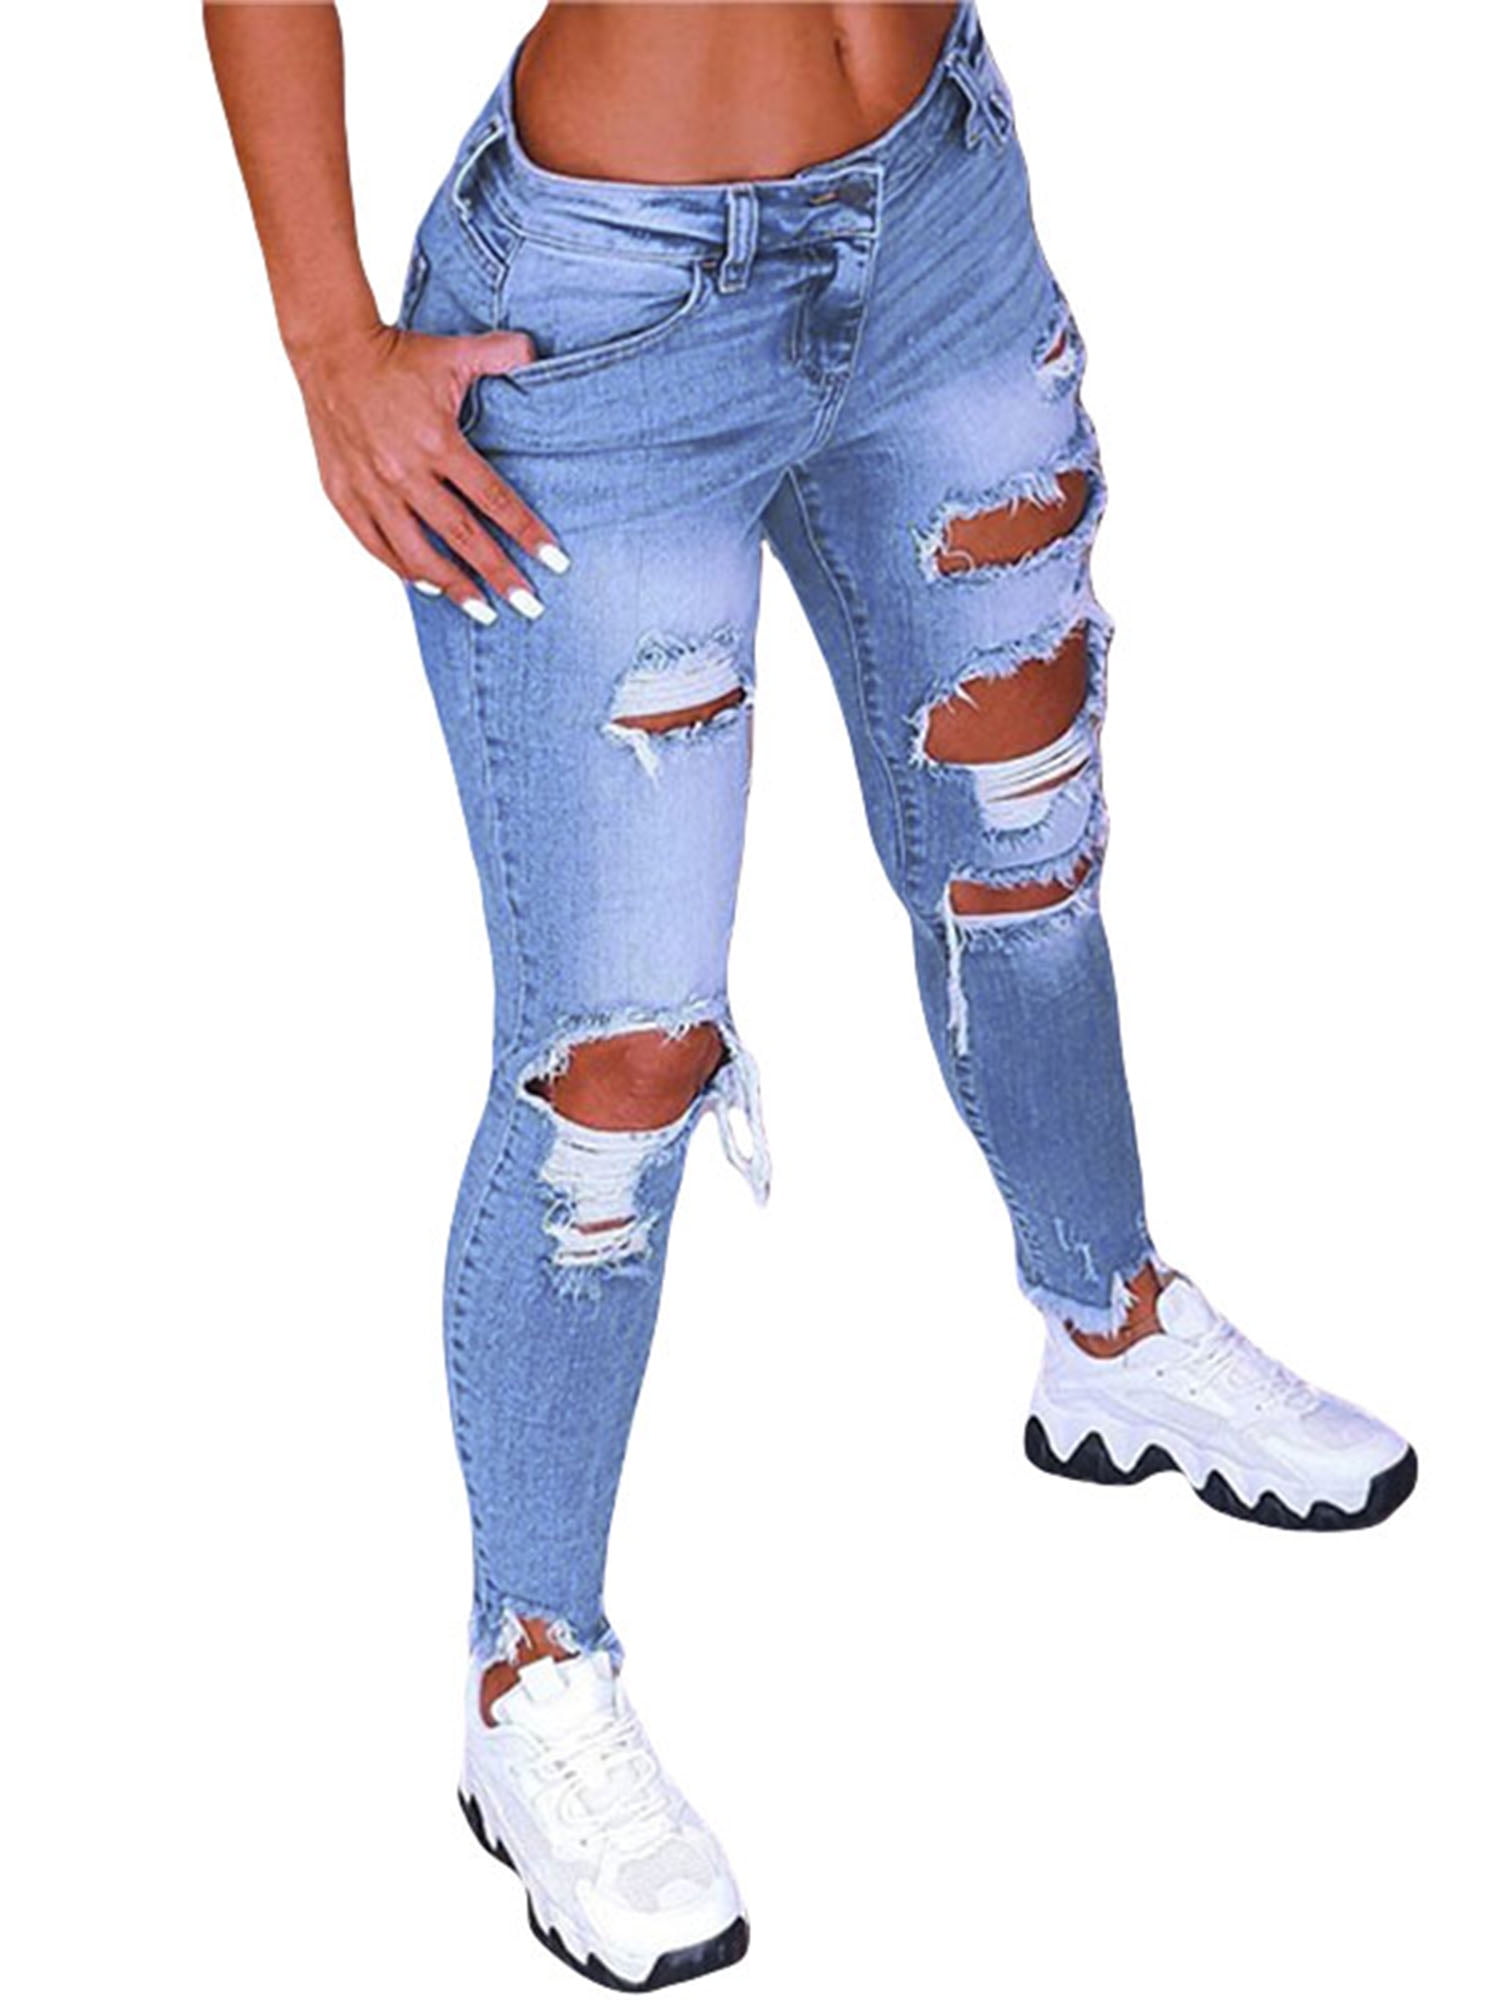 Spbamboo Womens Jeans Ripped Distressed Jeans Comfort Stretch Skinny Straight Denim Jeans